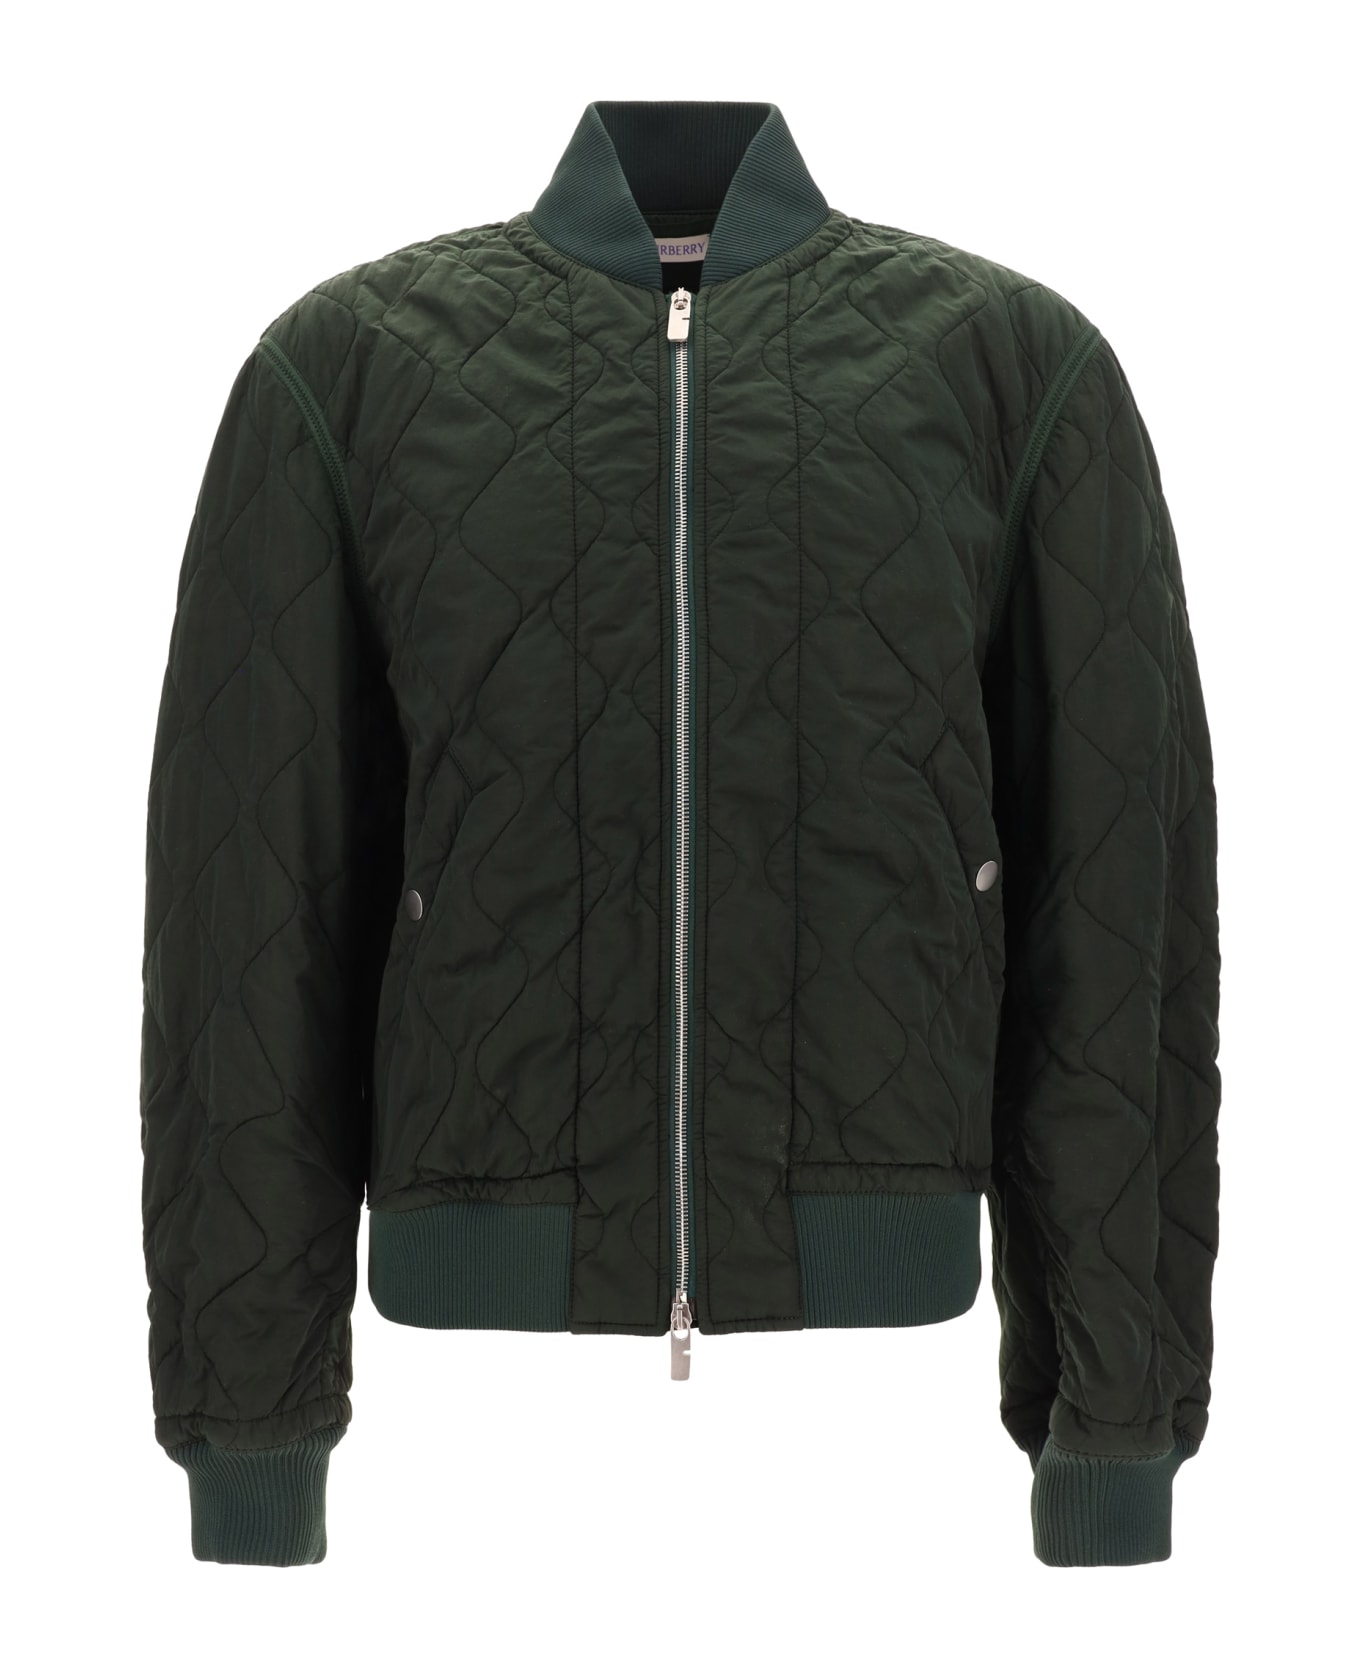 Burberry Long Sleeved Quilted Zip-up Bomber Jacket - Ivy ジャケット